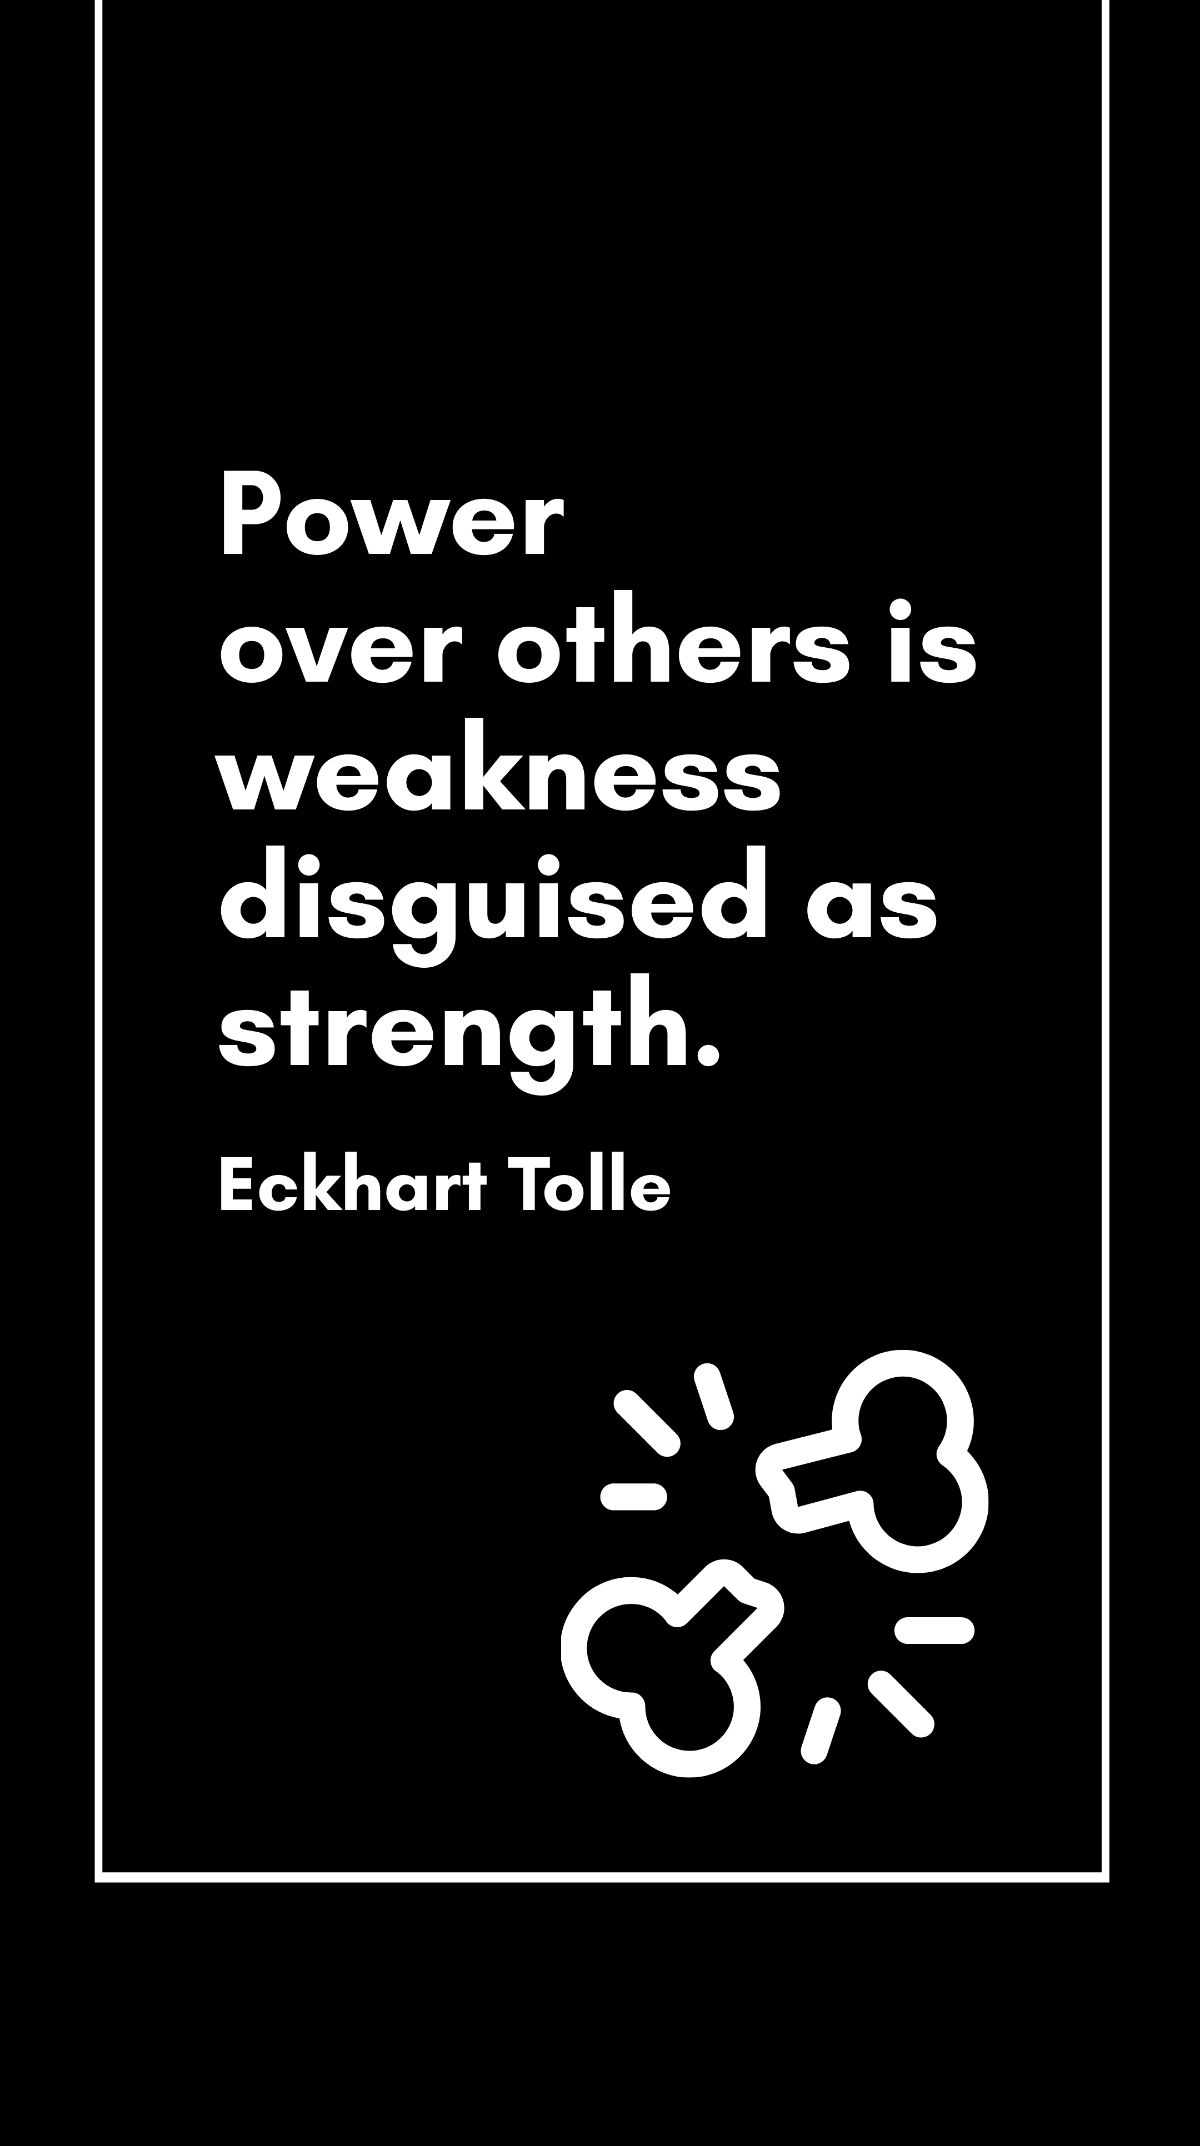 Eckhart Tolle - Power over others is weakness disguised as strength. Template